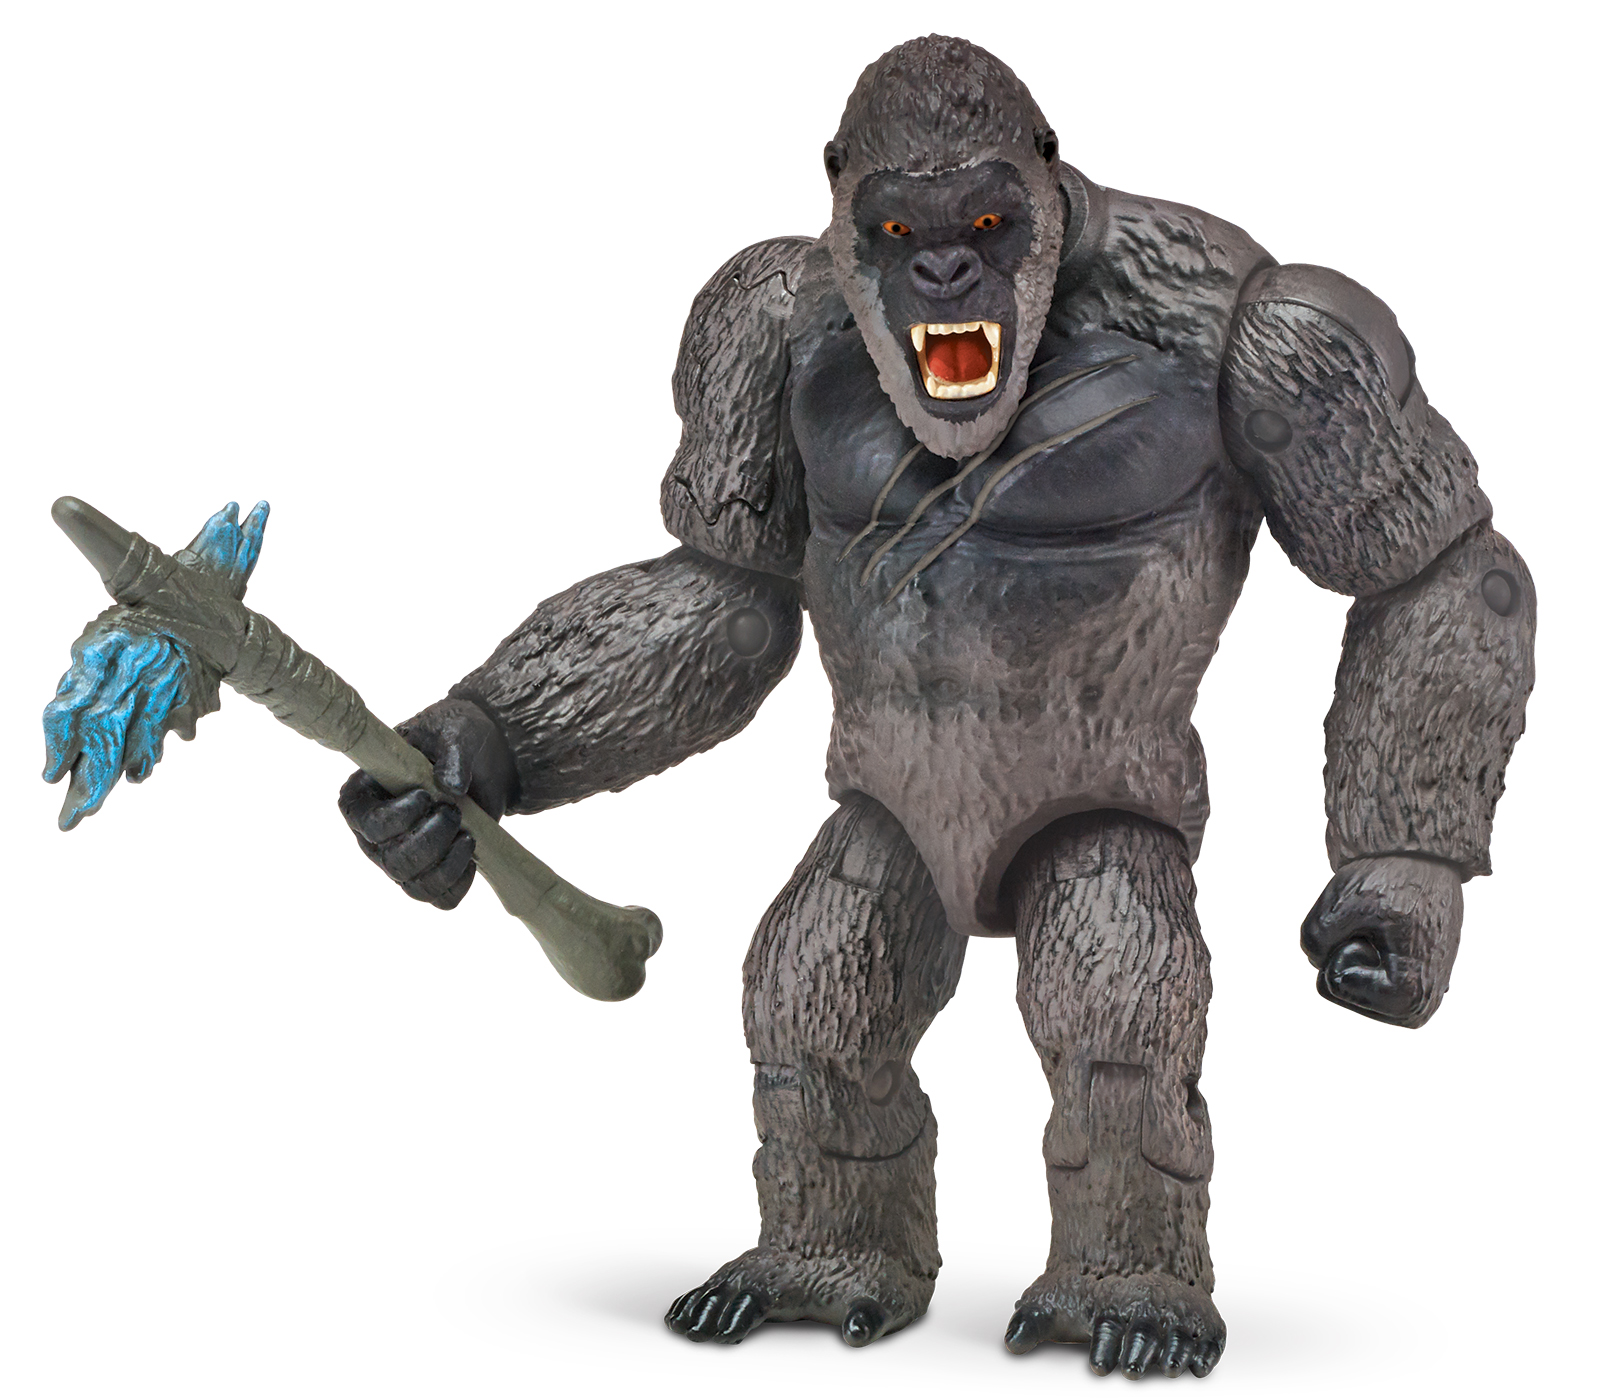 We're giving THREE lucky winners the chance to win the ENTIRE Monsterverse Toy Collection worth ...